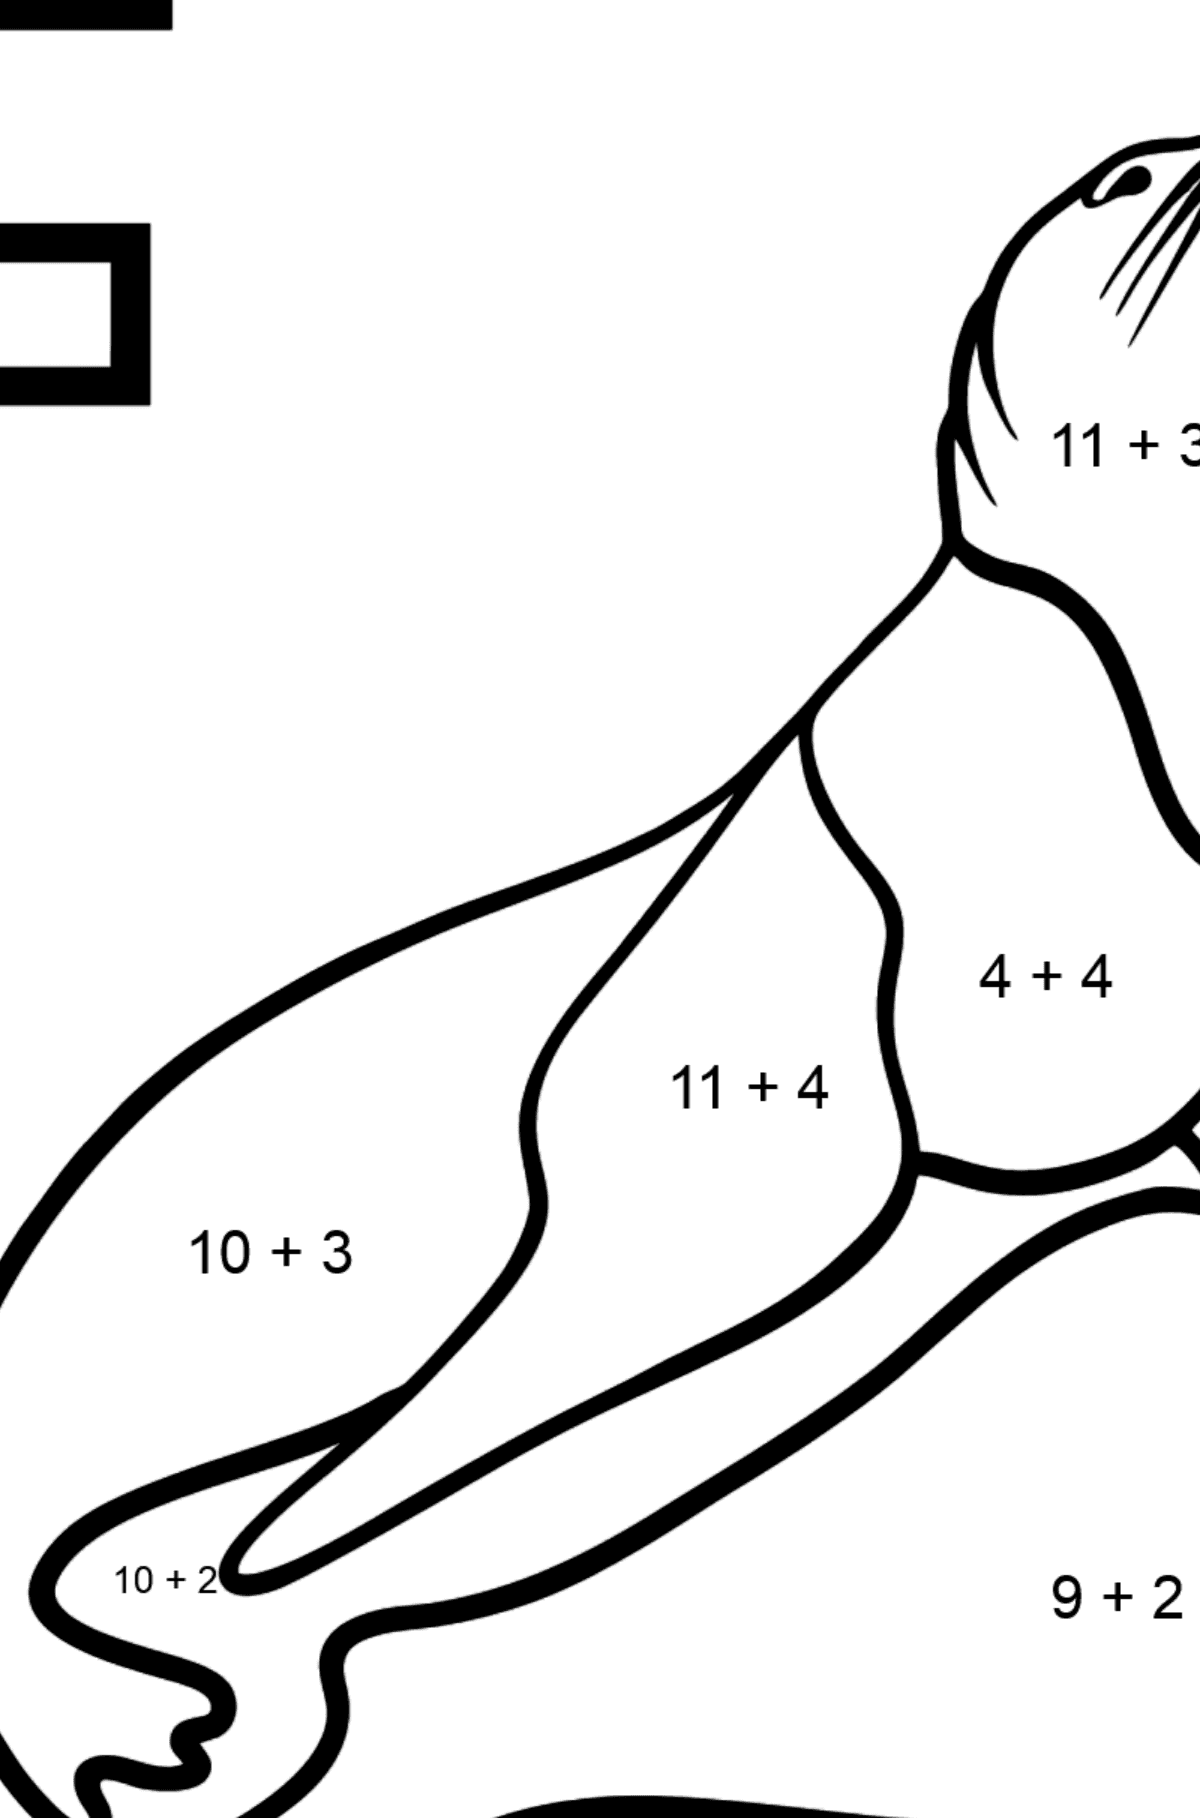 Spanish Letter F coloring pages - FOCA - Math Coloring - Addition for Kids